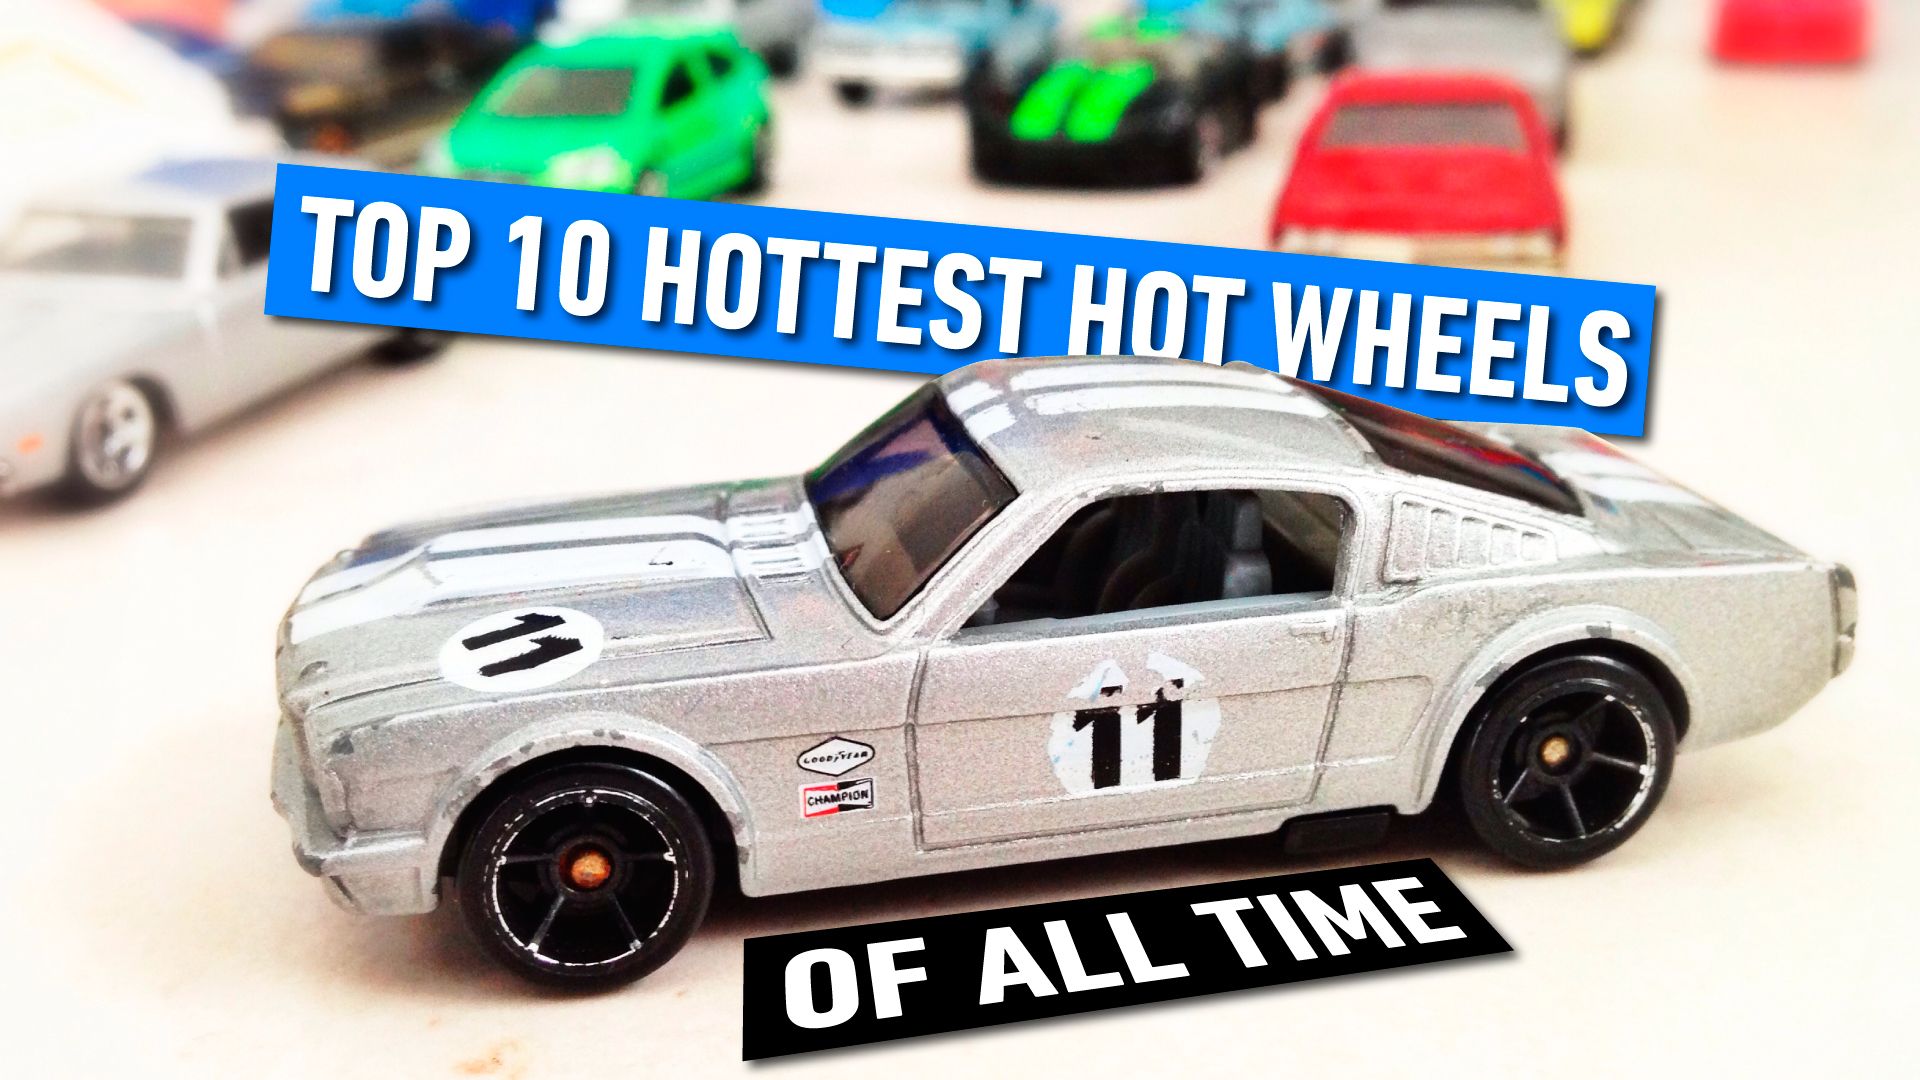 Silver Top 10 Hottest Wheels